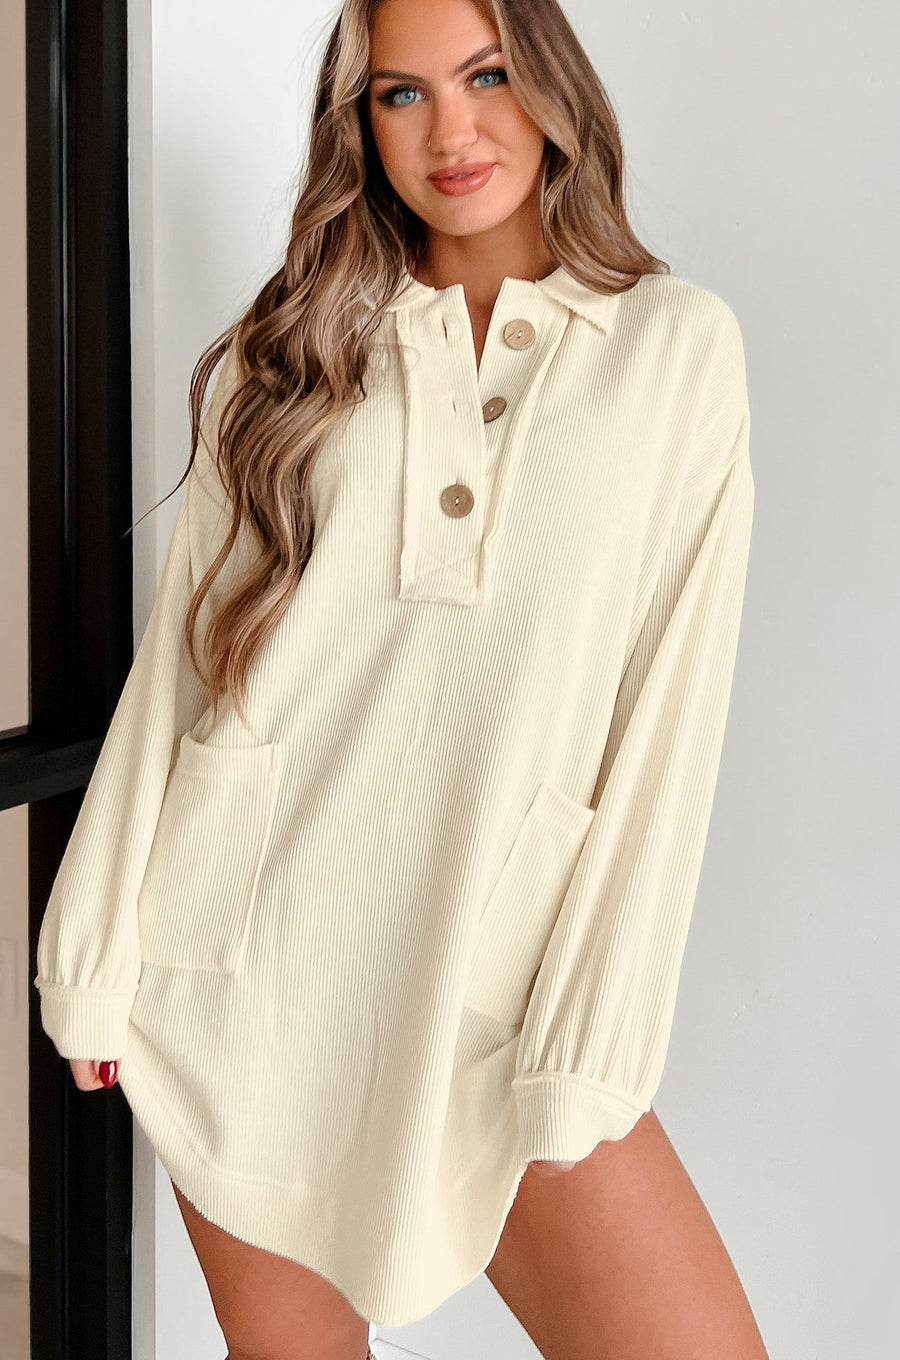 Lizzie Button Detailed Collared Tunic/Dress (Ivory) - NanaMacs